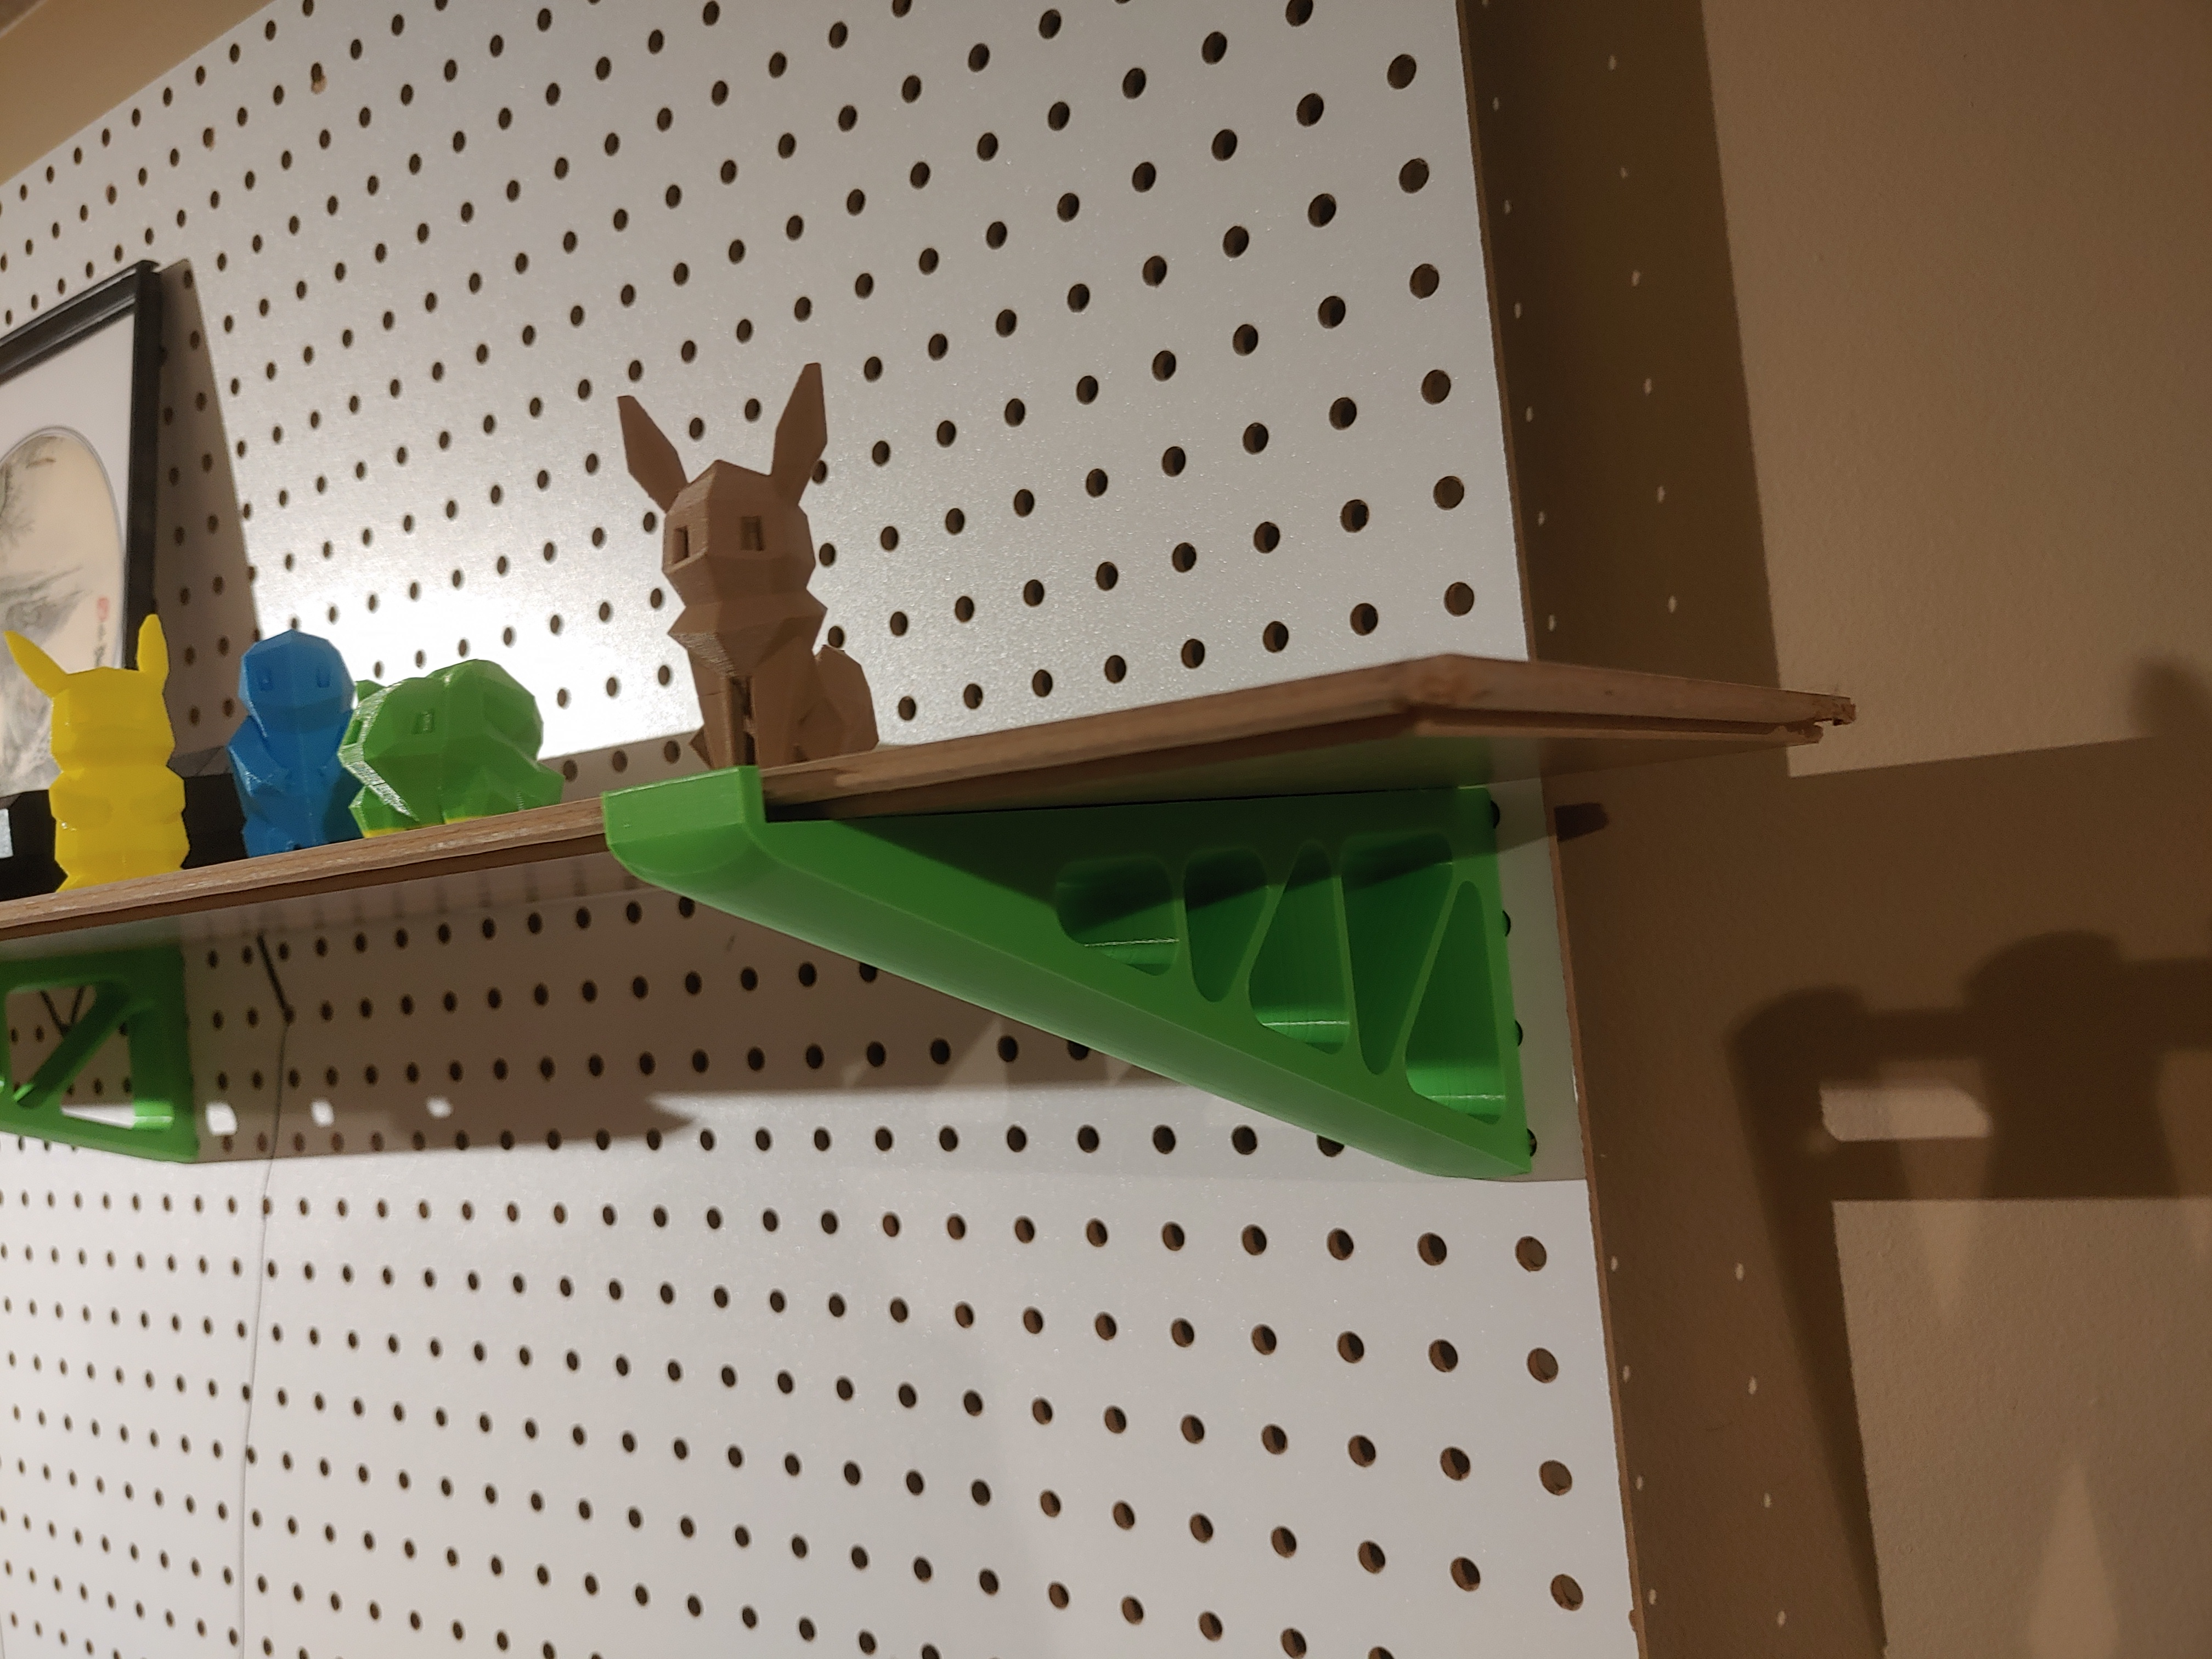 Pegboard Shelf Mount with ends